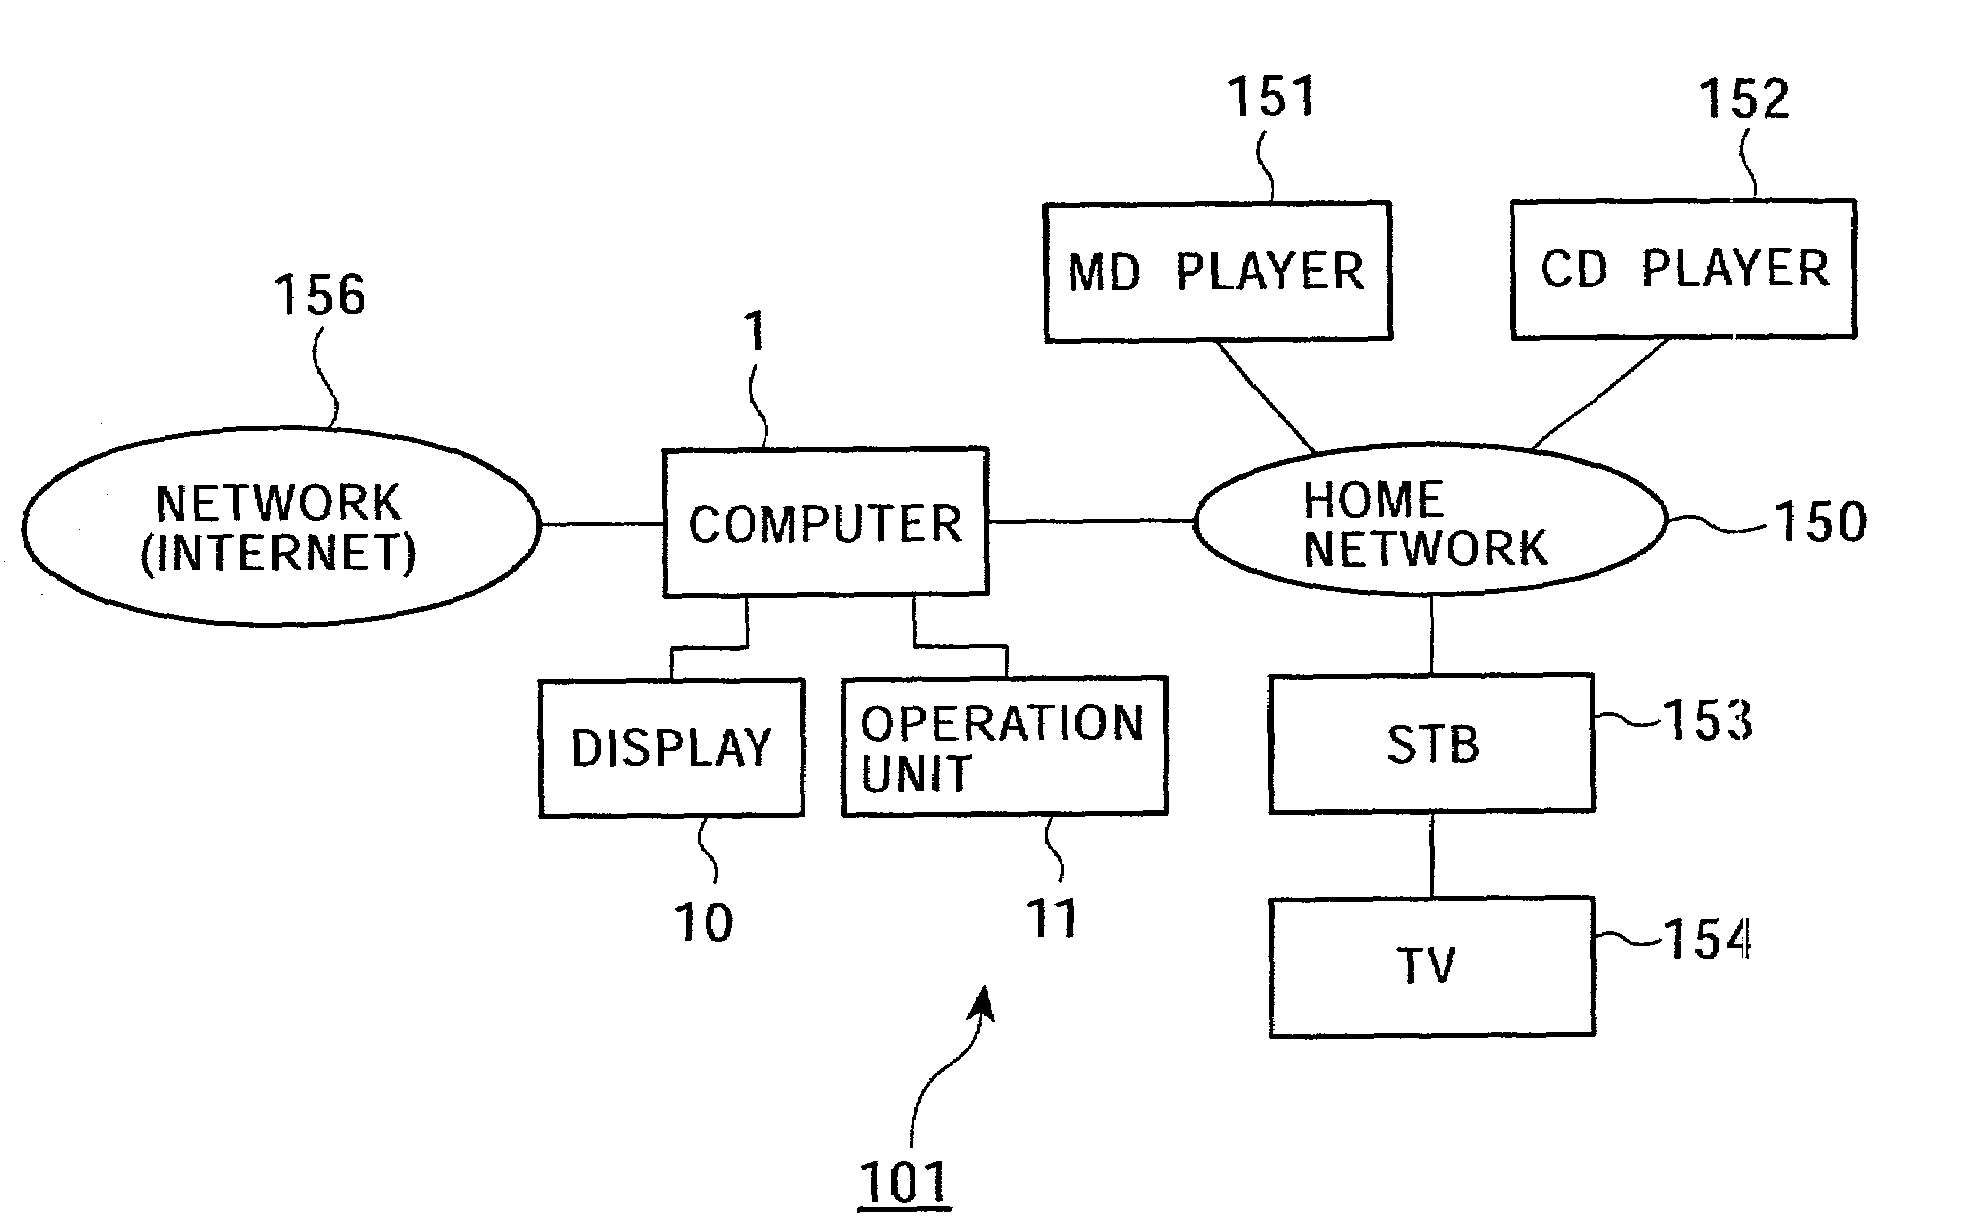 Graphical user interface utilizing a plurality of node processing means for view/drawing including analysis, selection, display control, view generation and re-generation